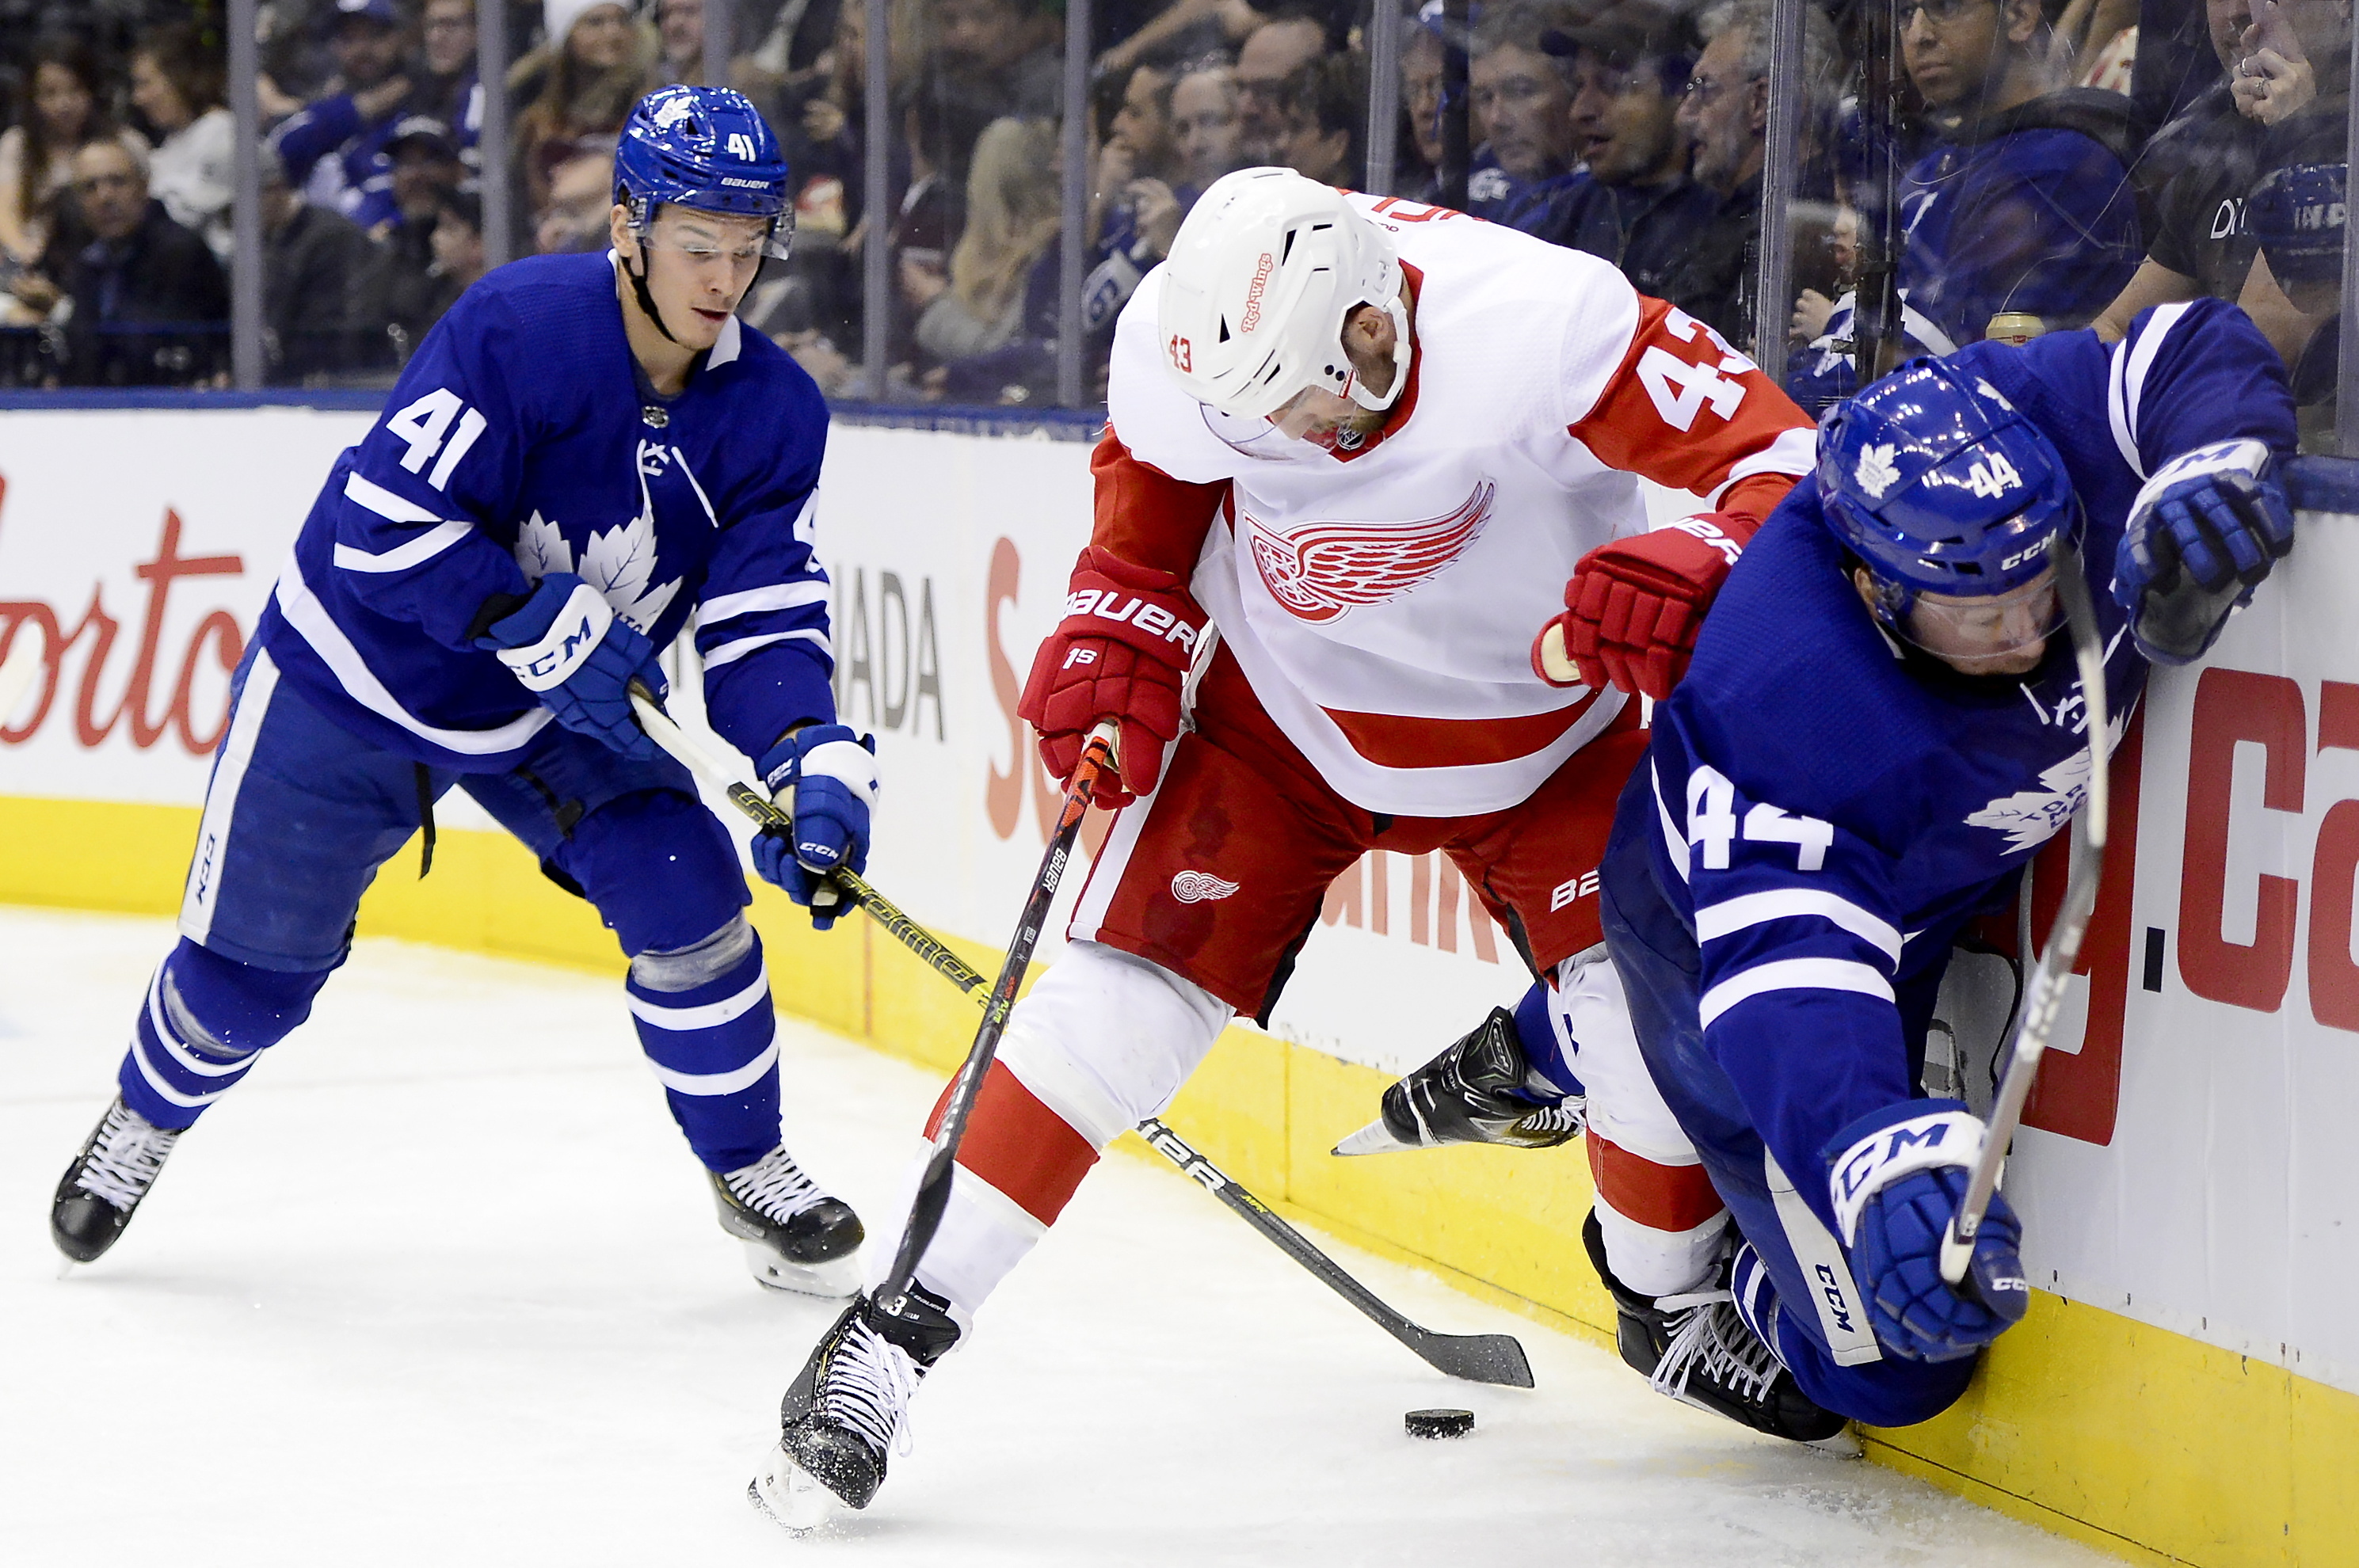 Hutchinson wins 1st, Maple Leafs beat Red Wings 4-1